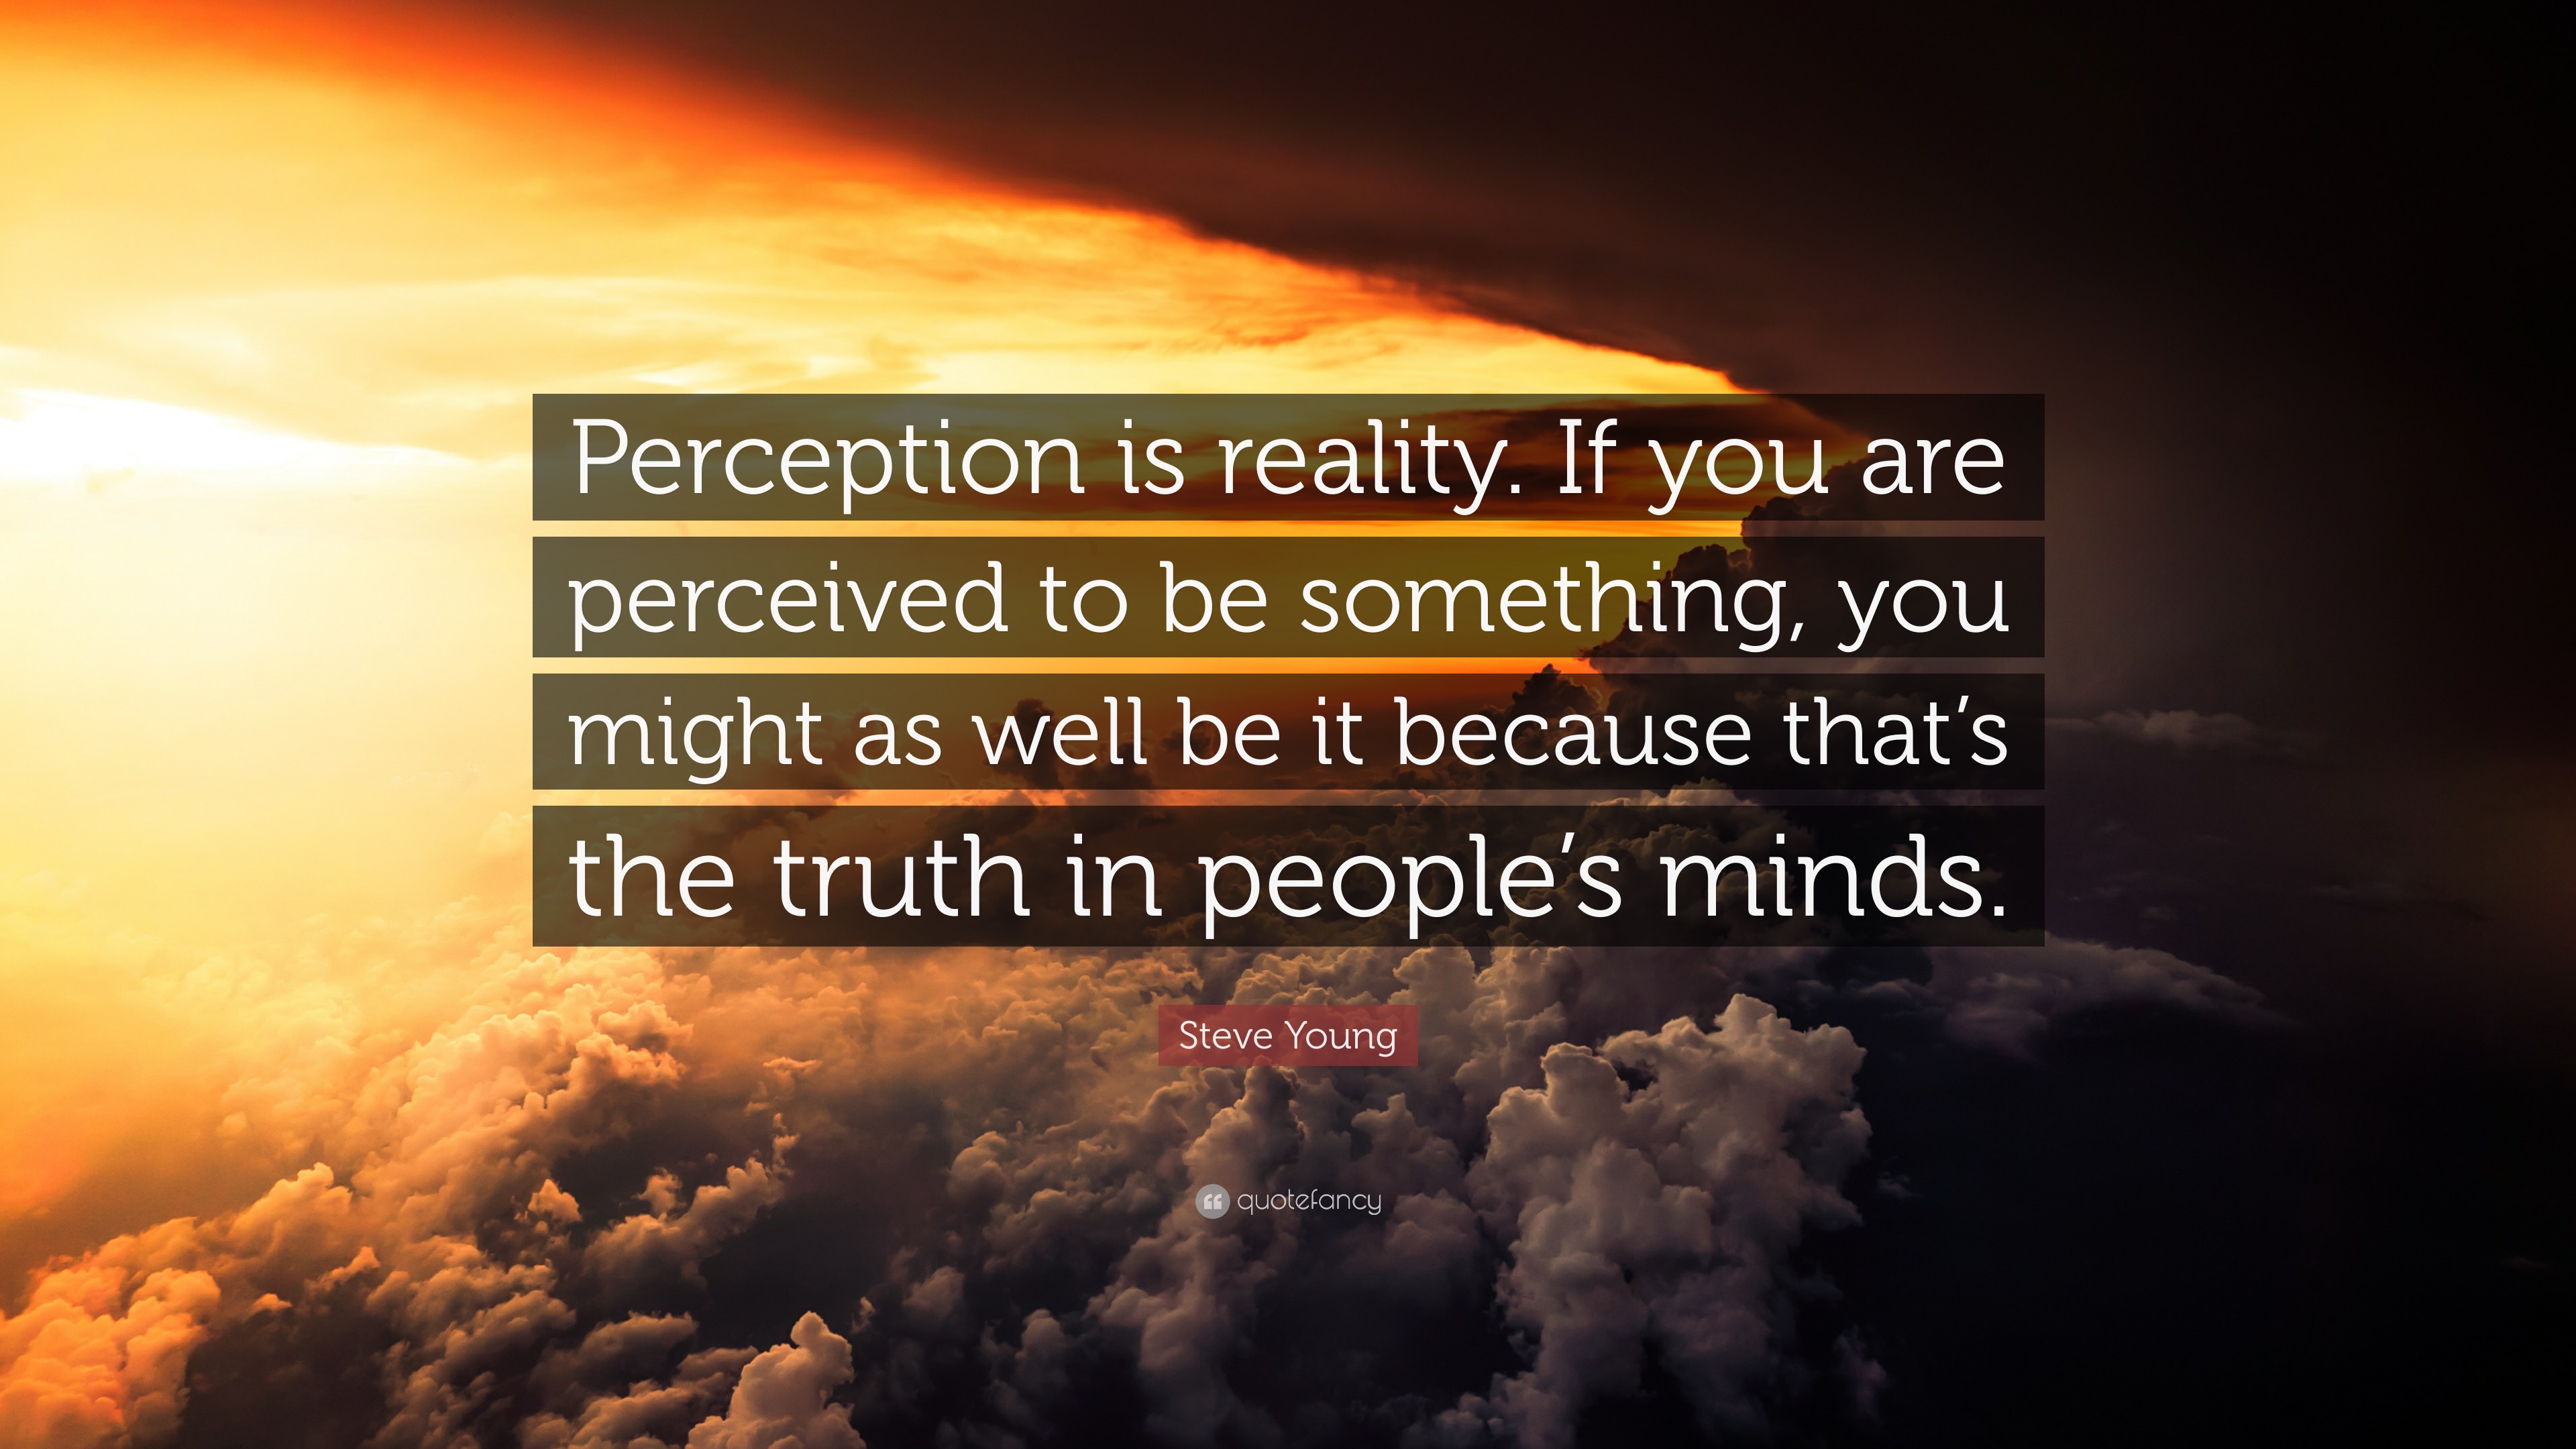 Steve Young Quote: “Perception is reality. If you are perceived to be ...